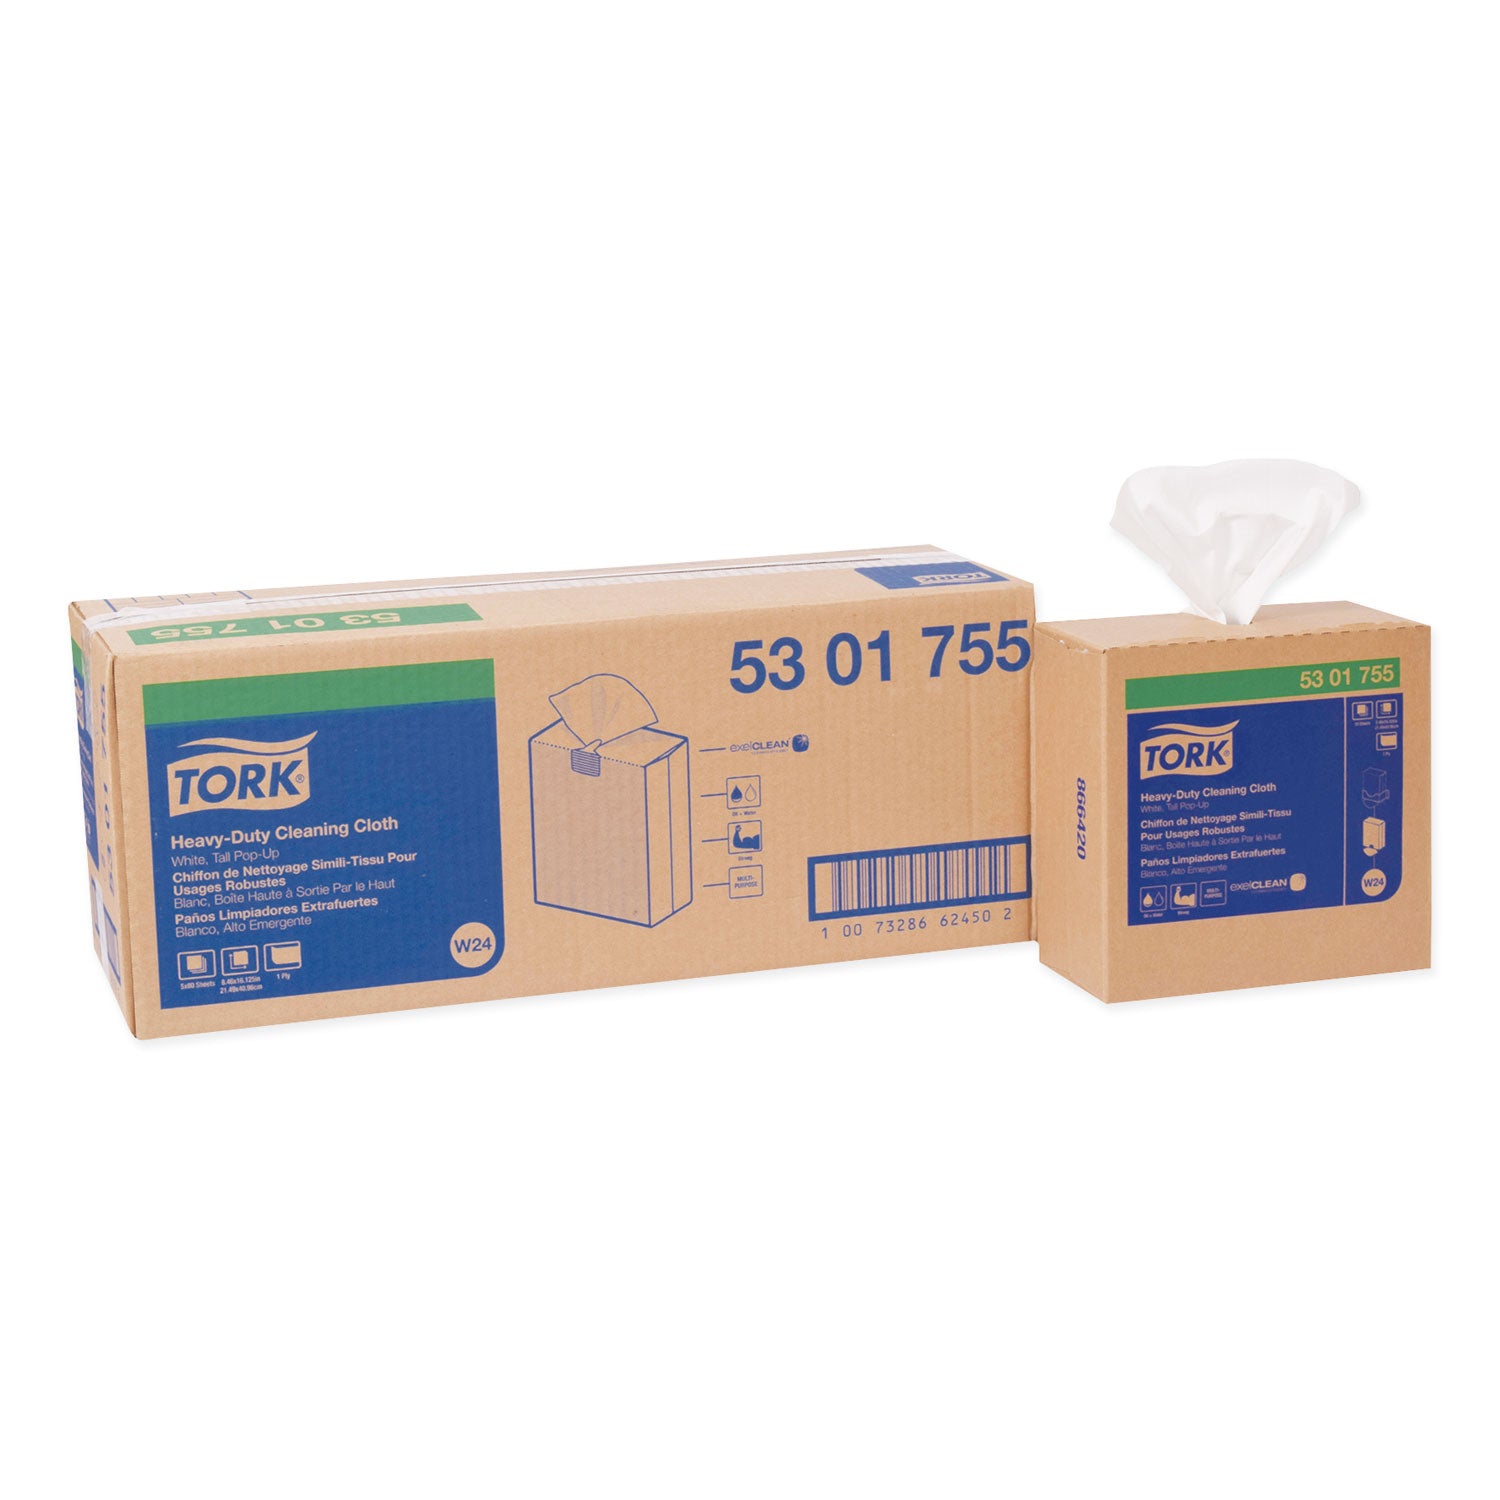 heavy-duty-cleaning-cloth-846-x-1613-white-80-box-5-boxes-carton_trk5301755 - 1